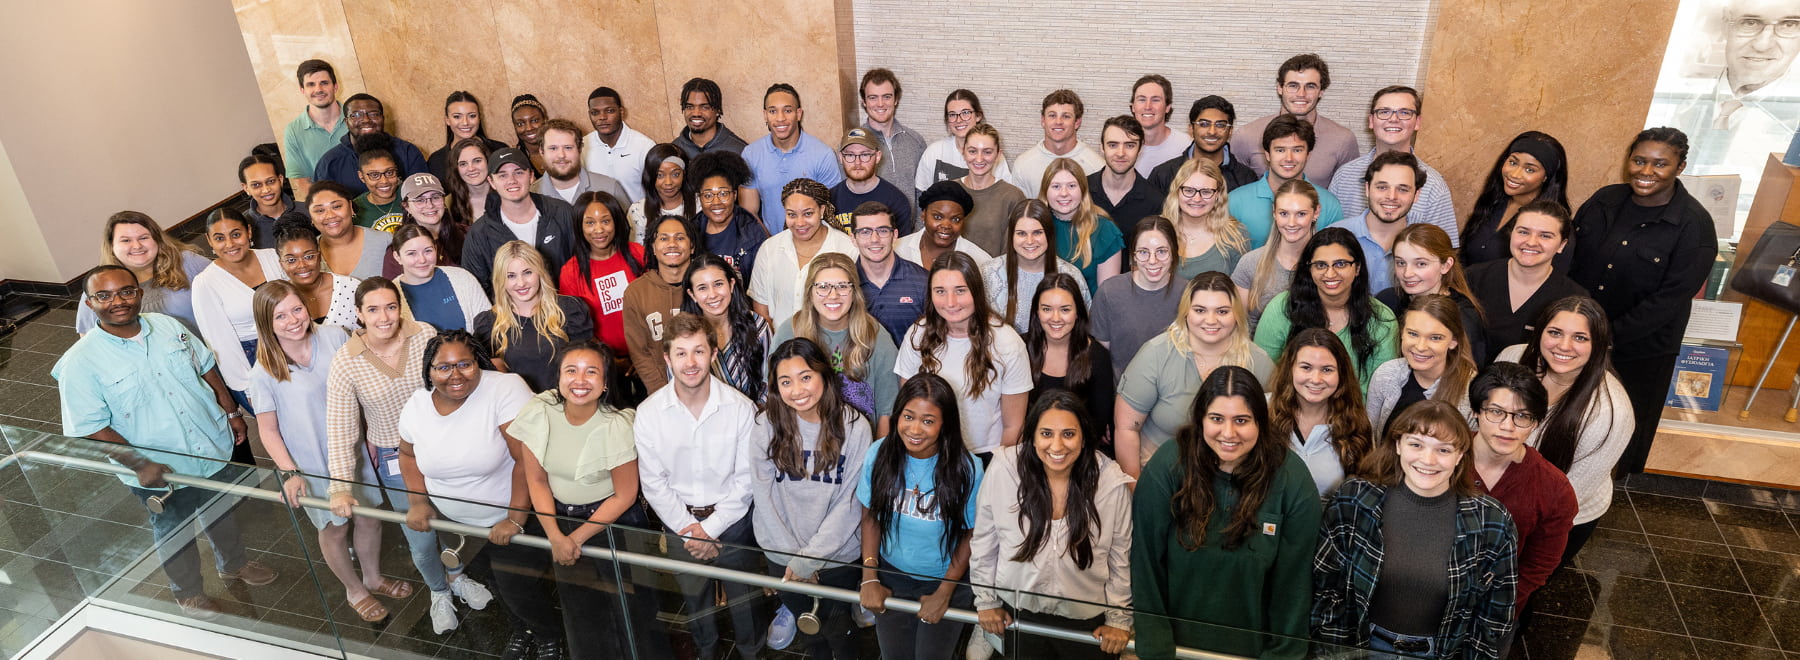 group photo of biomedical sciences students